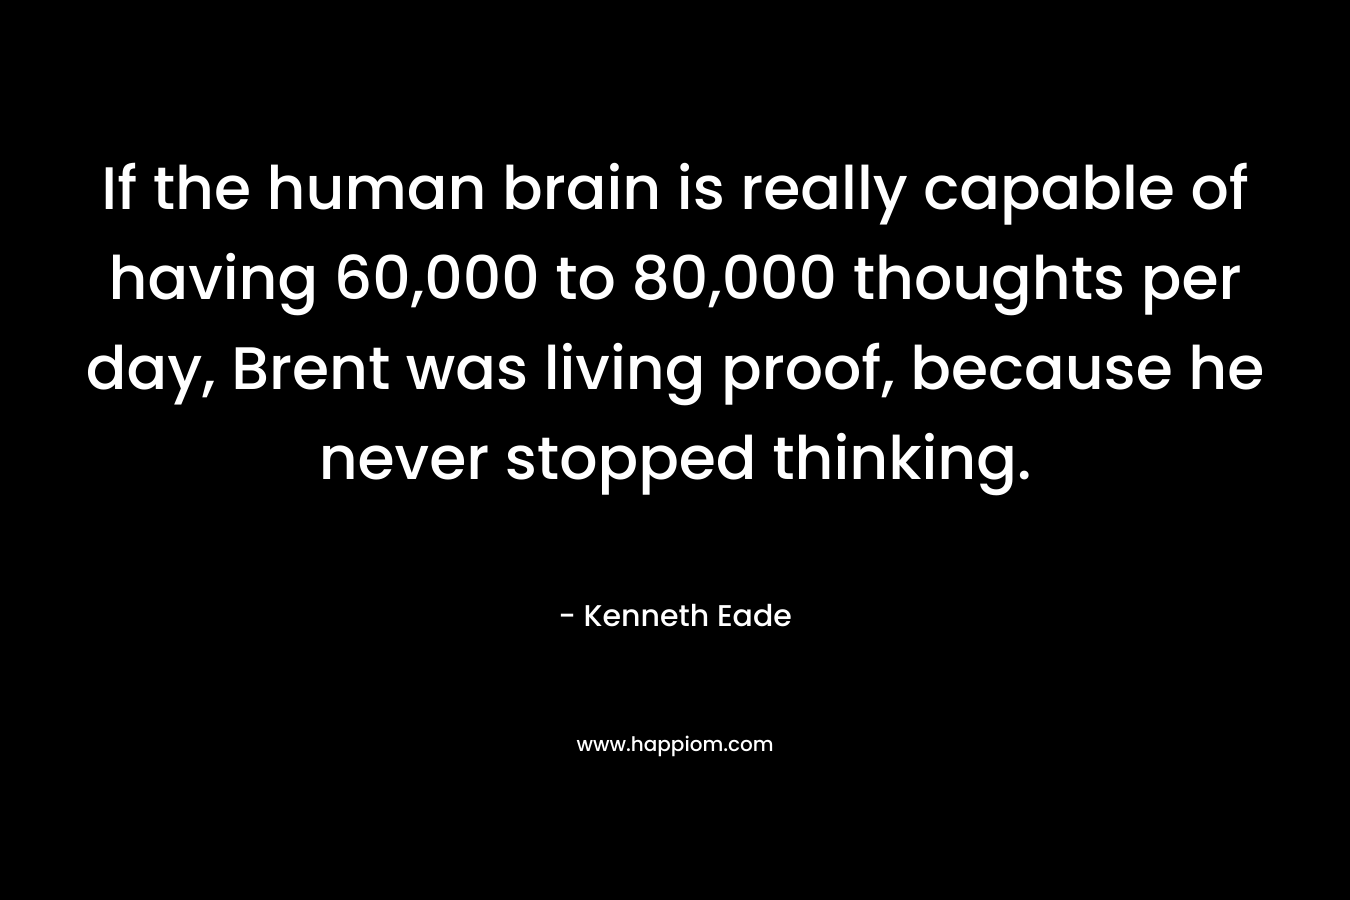 If the human brain is really capable of having 60,000 to 80,000 thoughts per day, Brent was living proof, because he never stopped thinking.